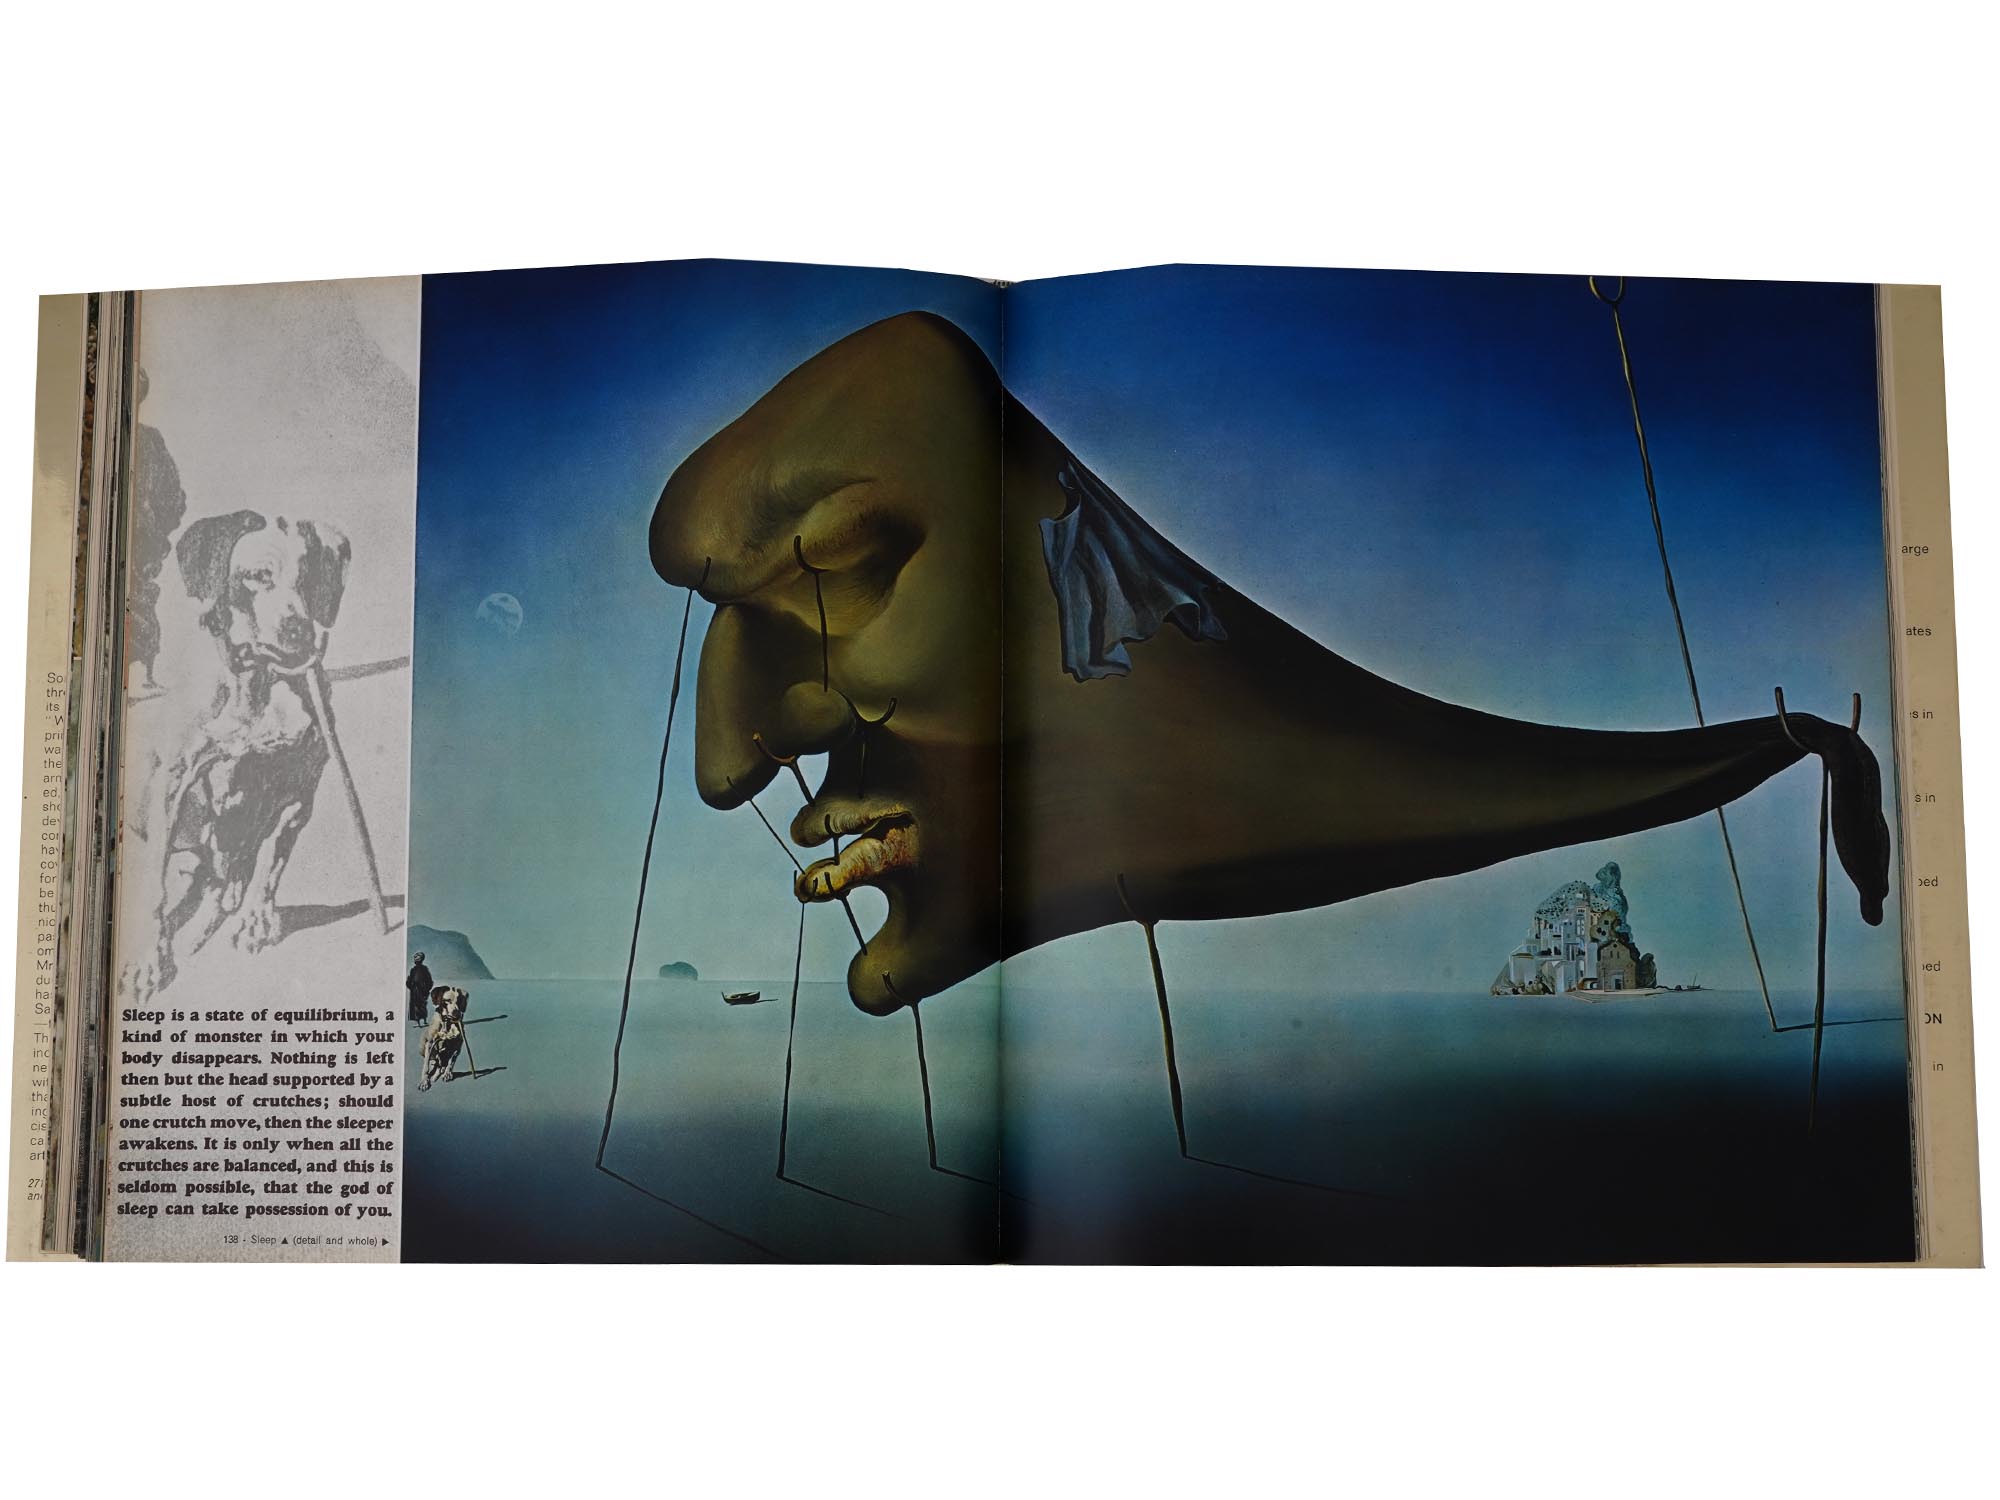 1968 SALVADOR DALI ART BOOK FIRST EDITION WITH JACKET PIC-10